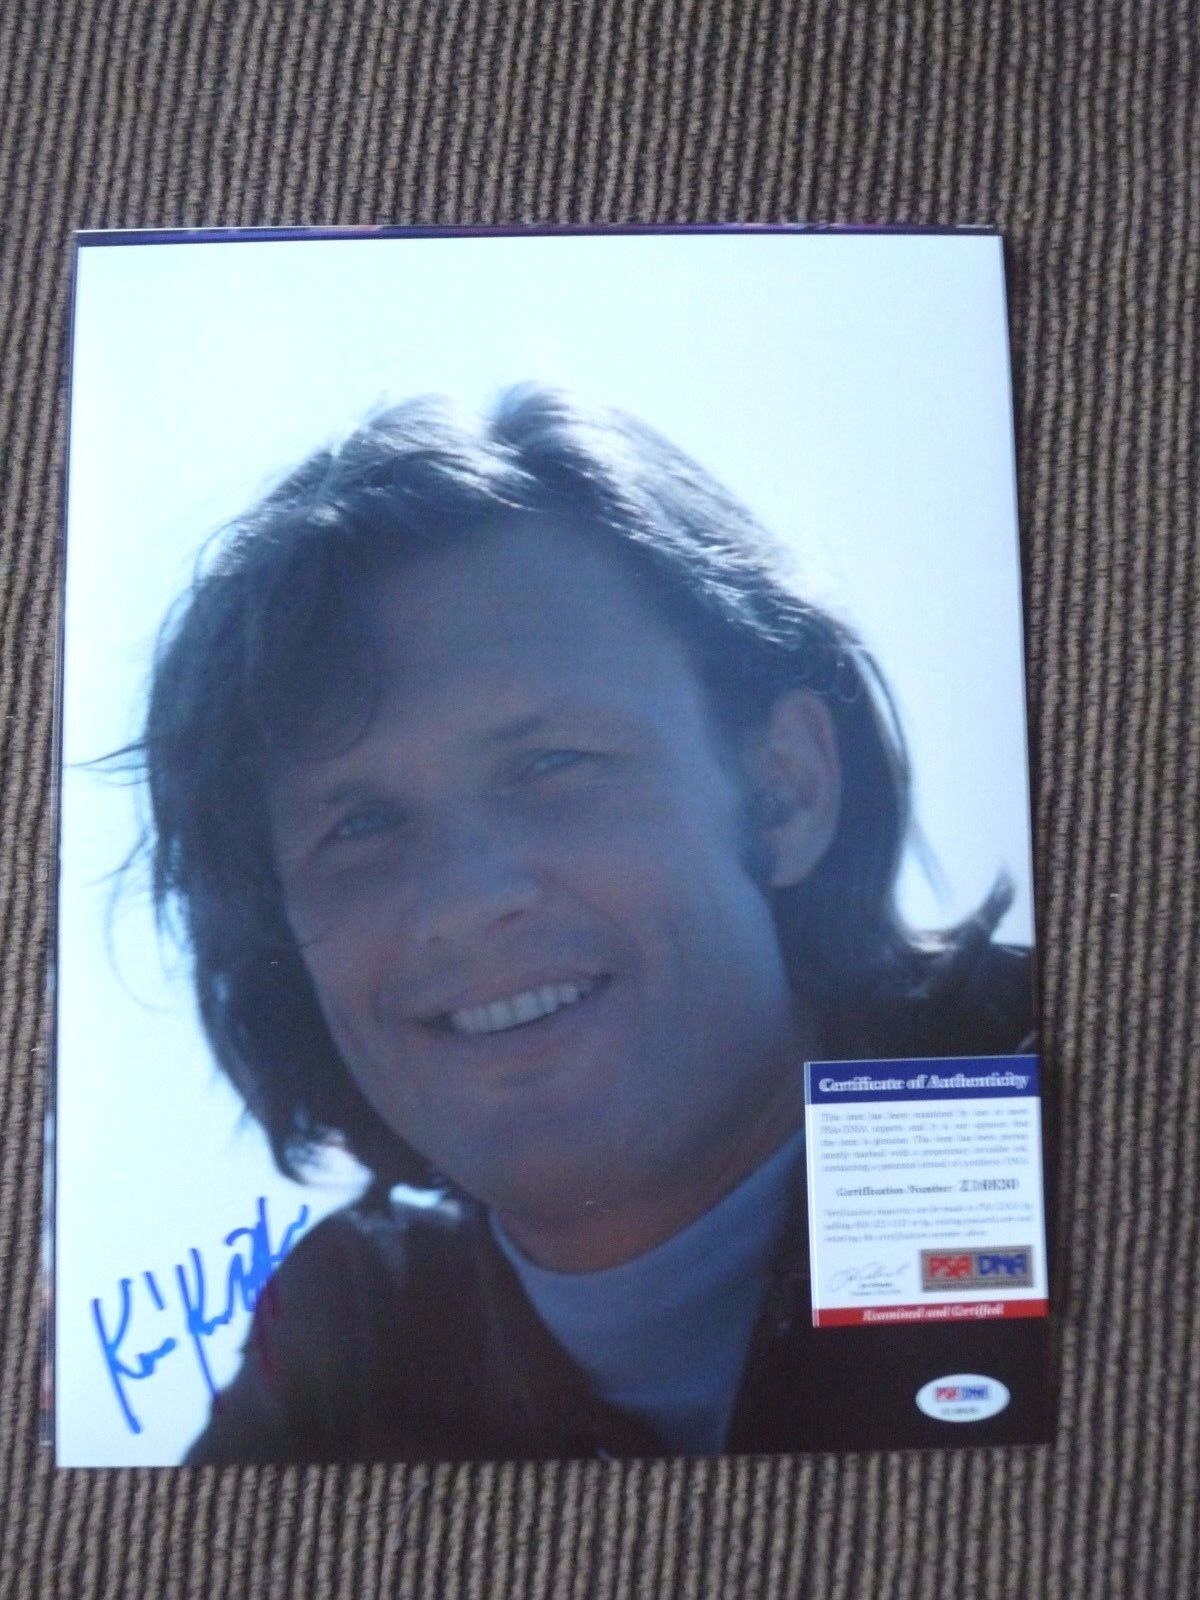 KRIS KRISTOFFERSON Vintage Signed Color 11x14 Photo Poster painting #3 PSA Certified F5